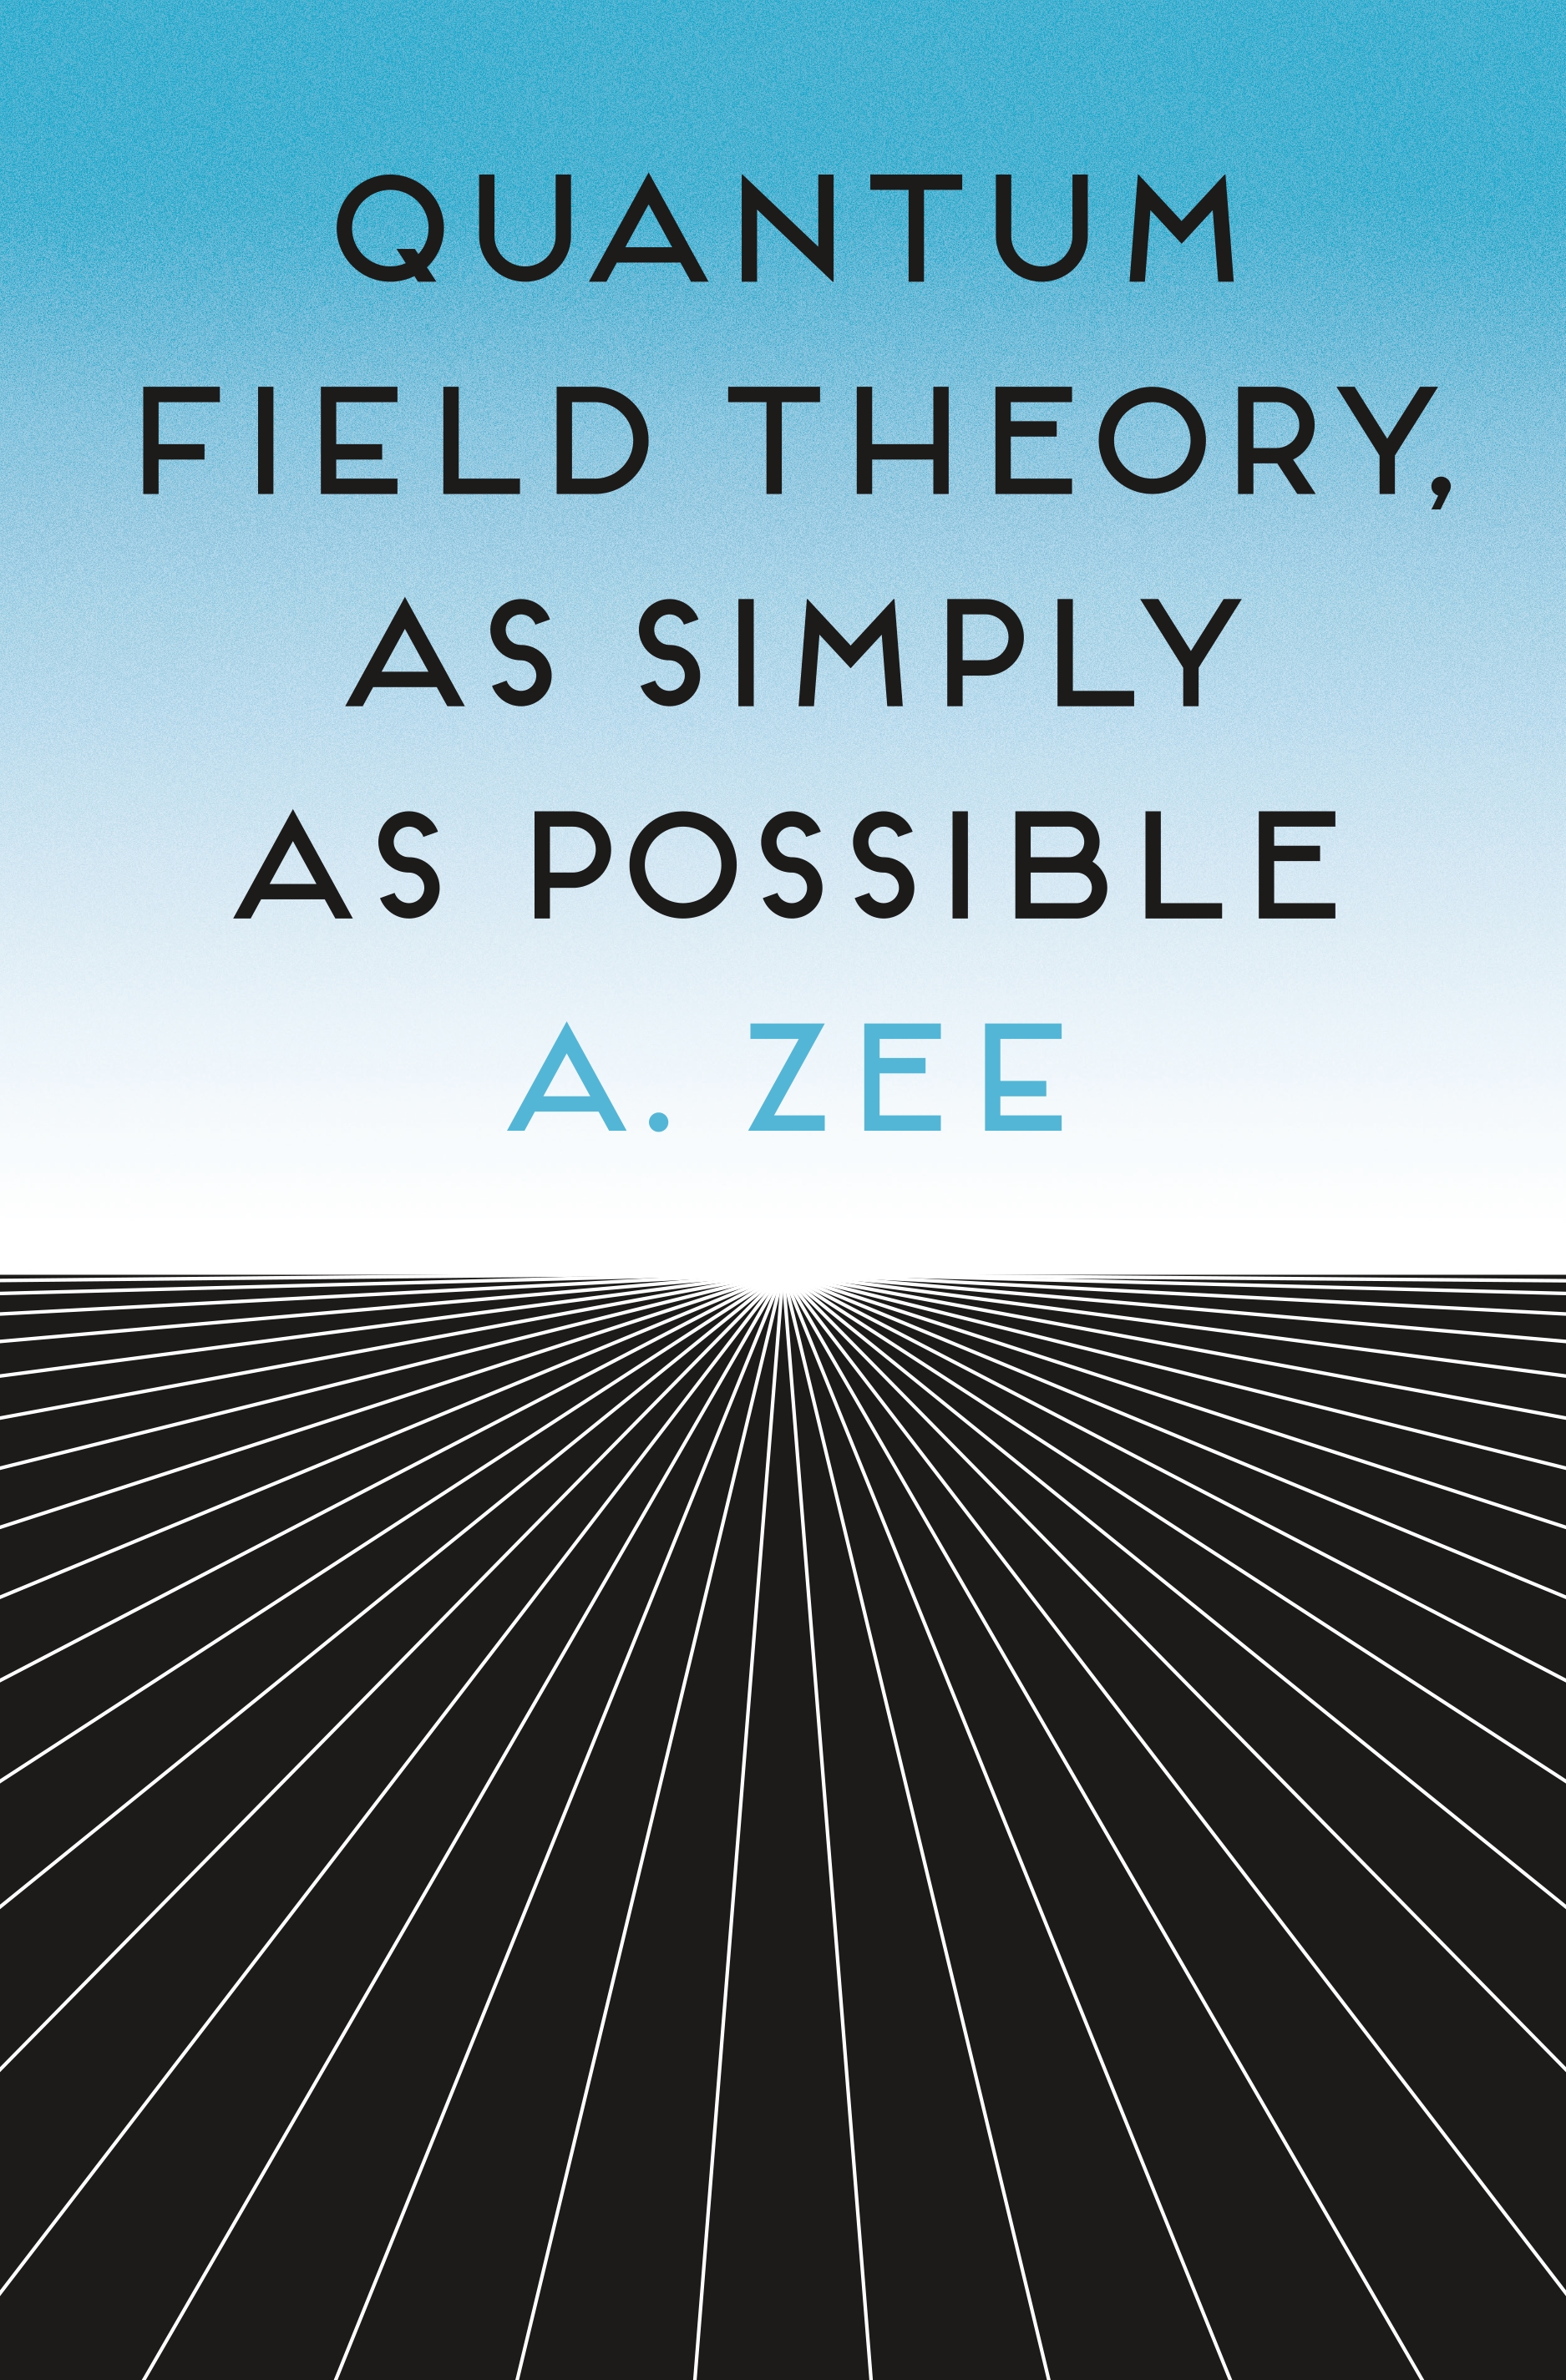 Quantum Field Theory is a - The Knowledge Institute